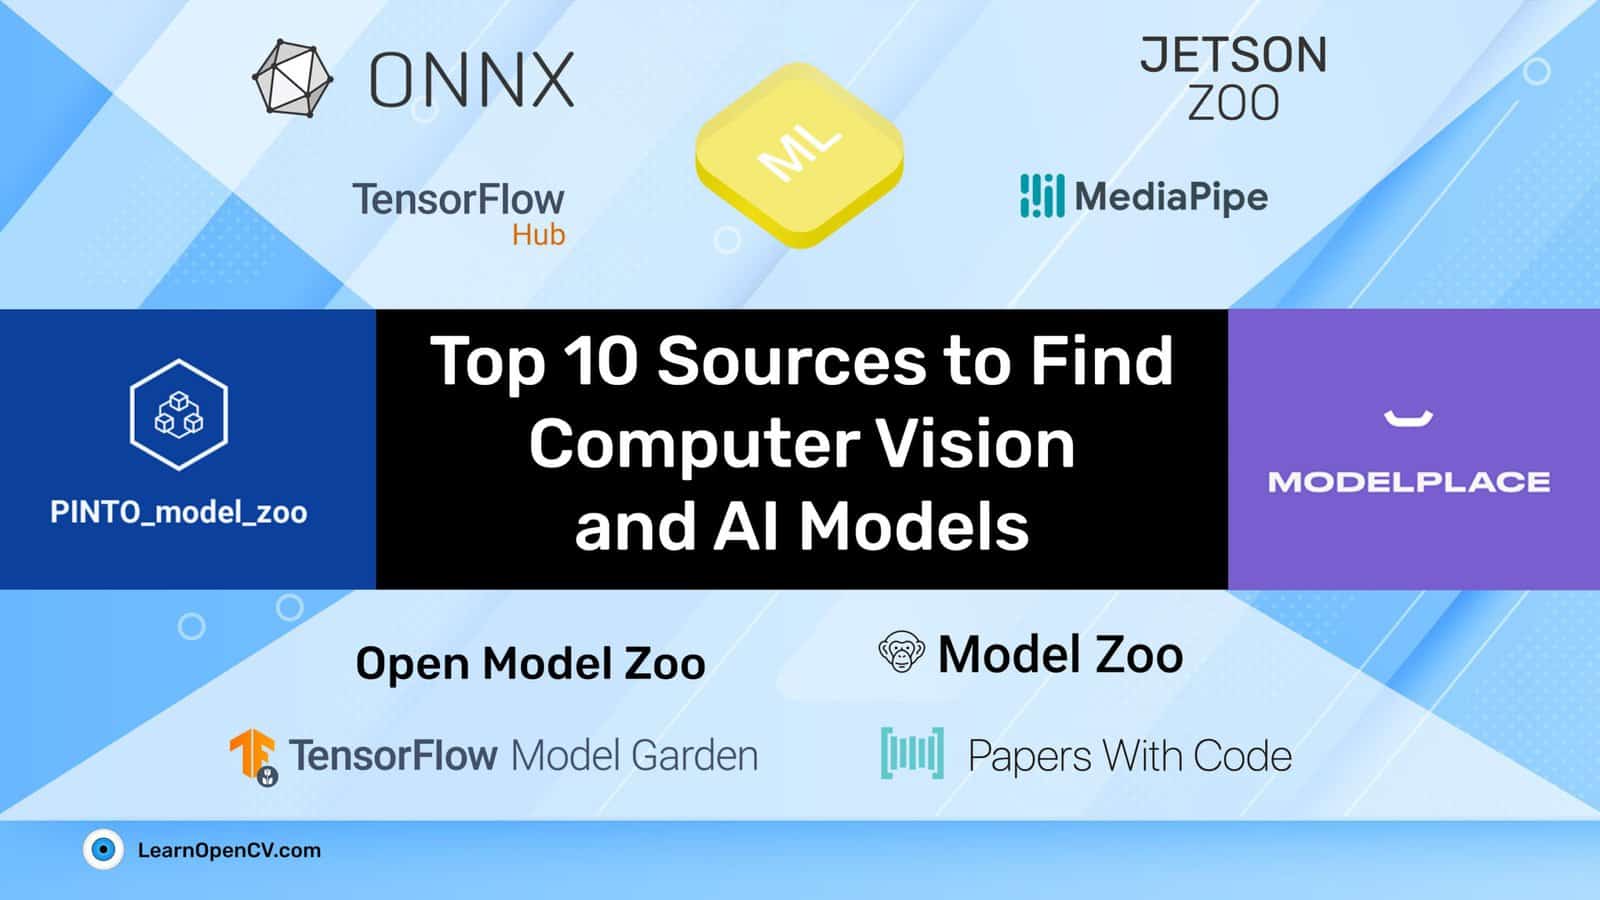 Top 10 Sources to Find Computer Vision and AI Models